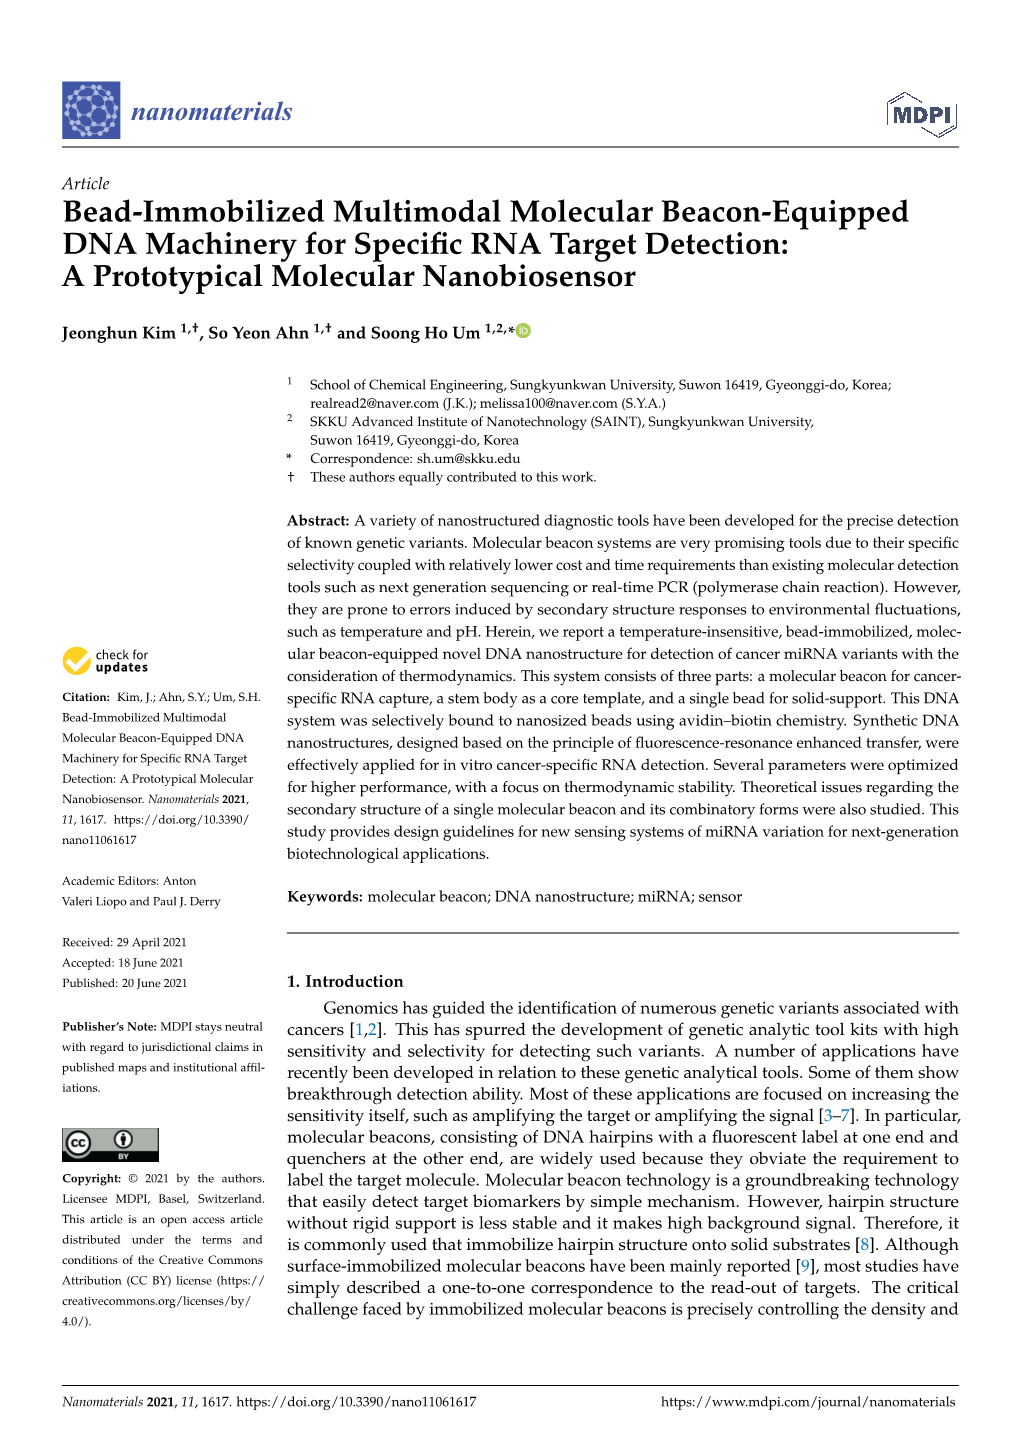 Bead-Immobilized Multimodal Molecular Beacon-Equipped DNA Machinery for Speciﬁc RNA Target Detection: a Prototypical Molecular Nanobiosensor